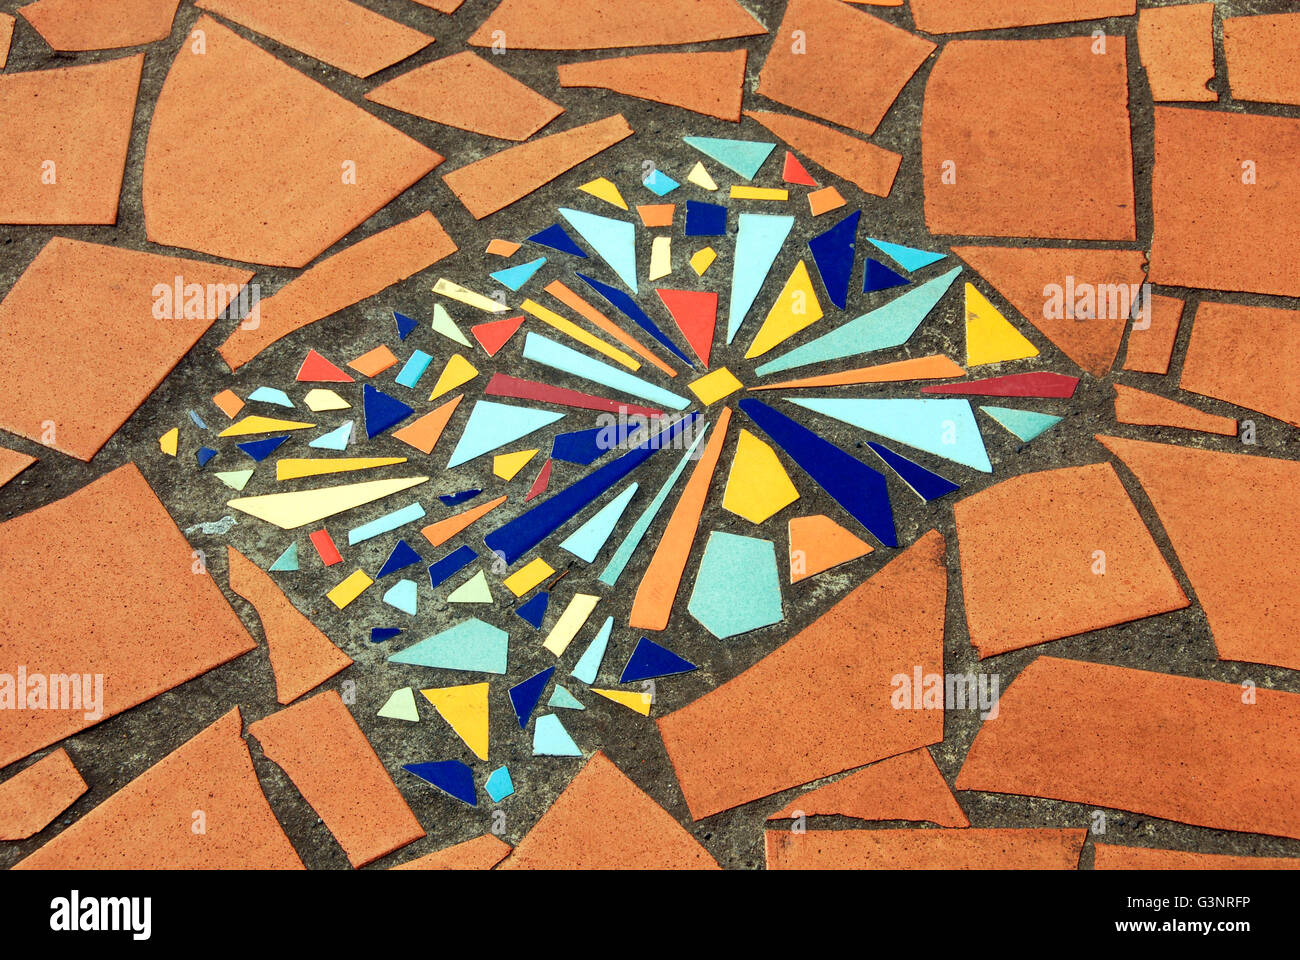 Tiled pattern in footpath, Martinique, Caribbean Stock Photo